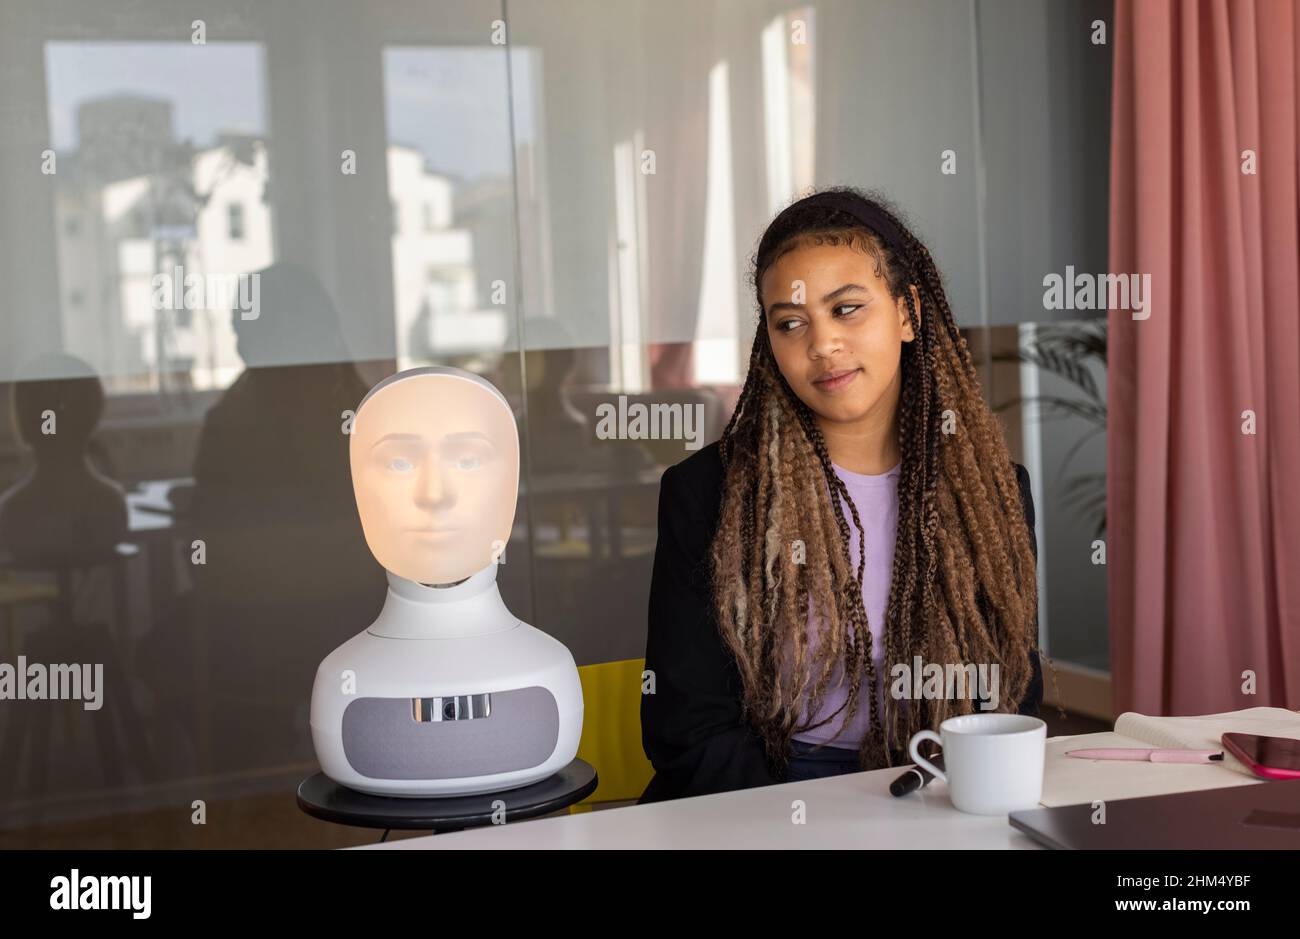 Businesswoman looking at robot voice assistant Stock Photo